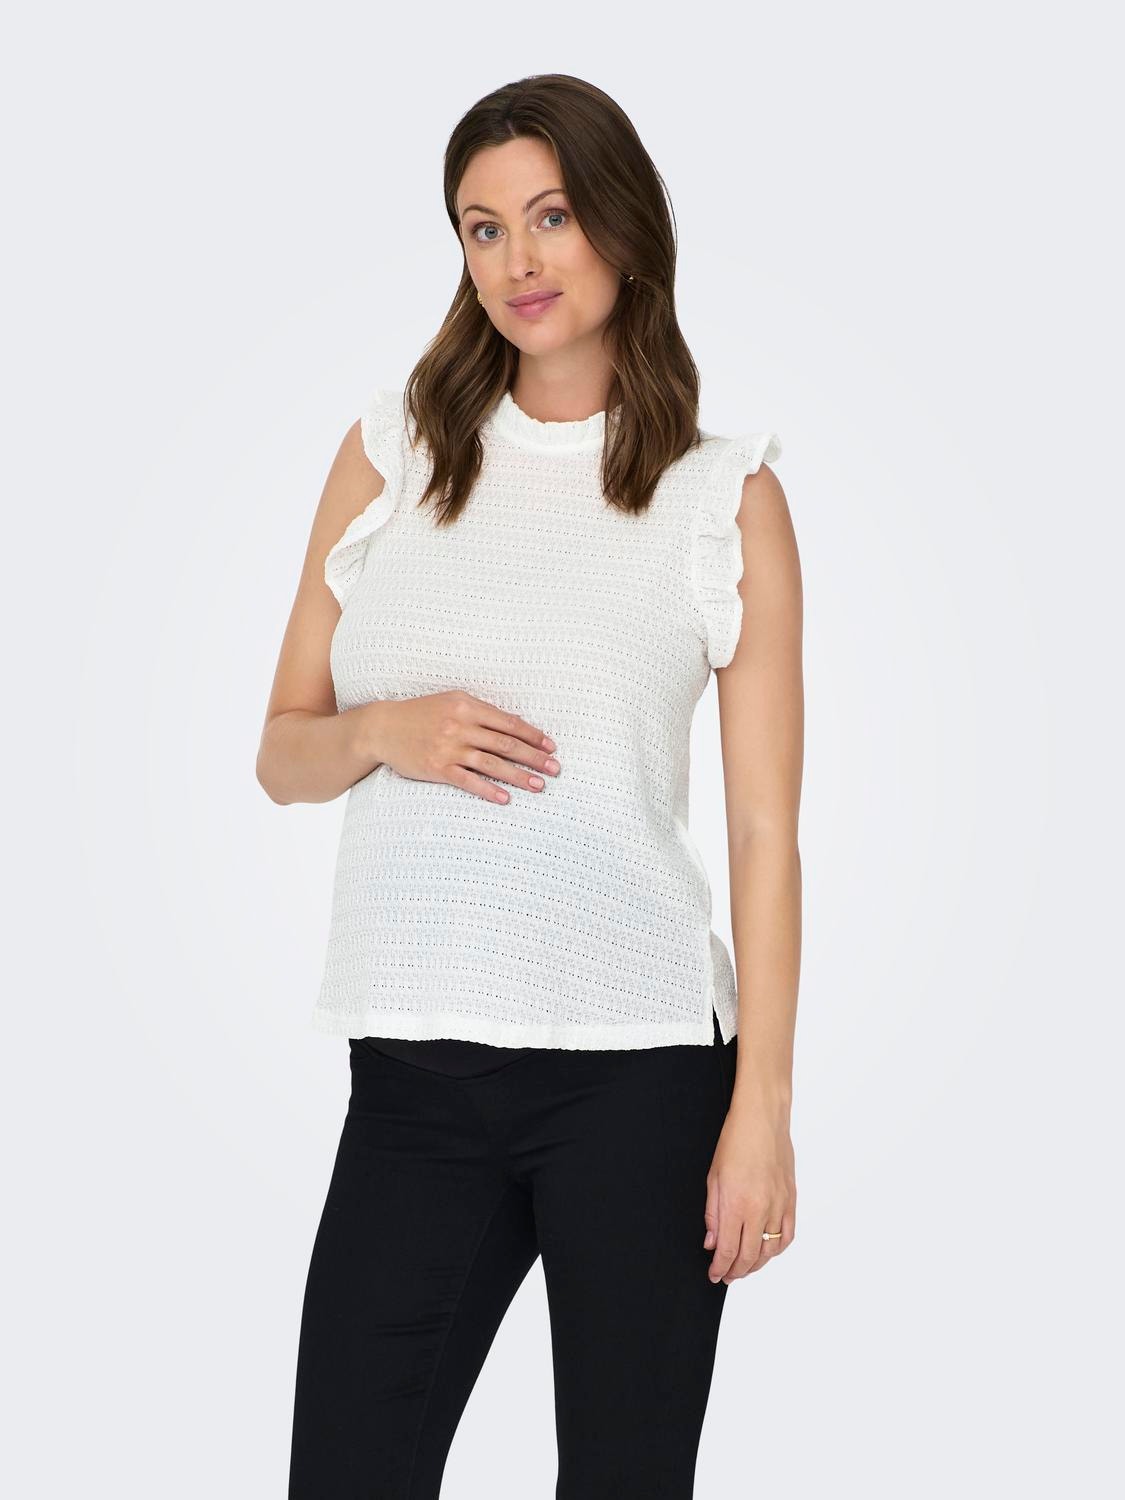 ONLY Mama o-neck top with frill -Cloud Dancer - 15305714